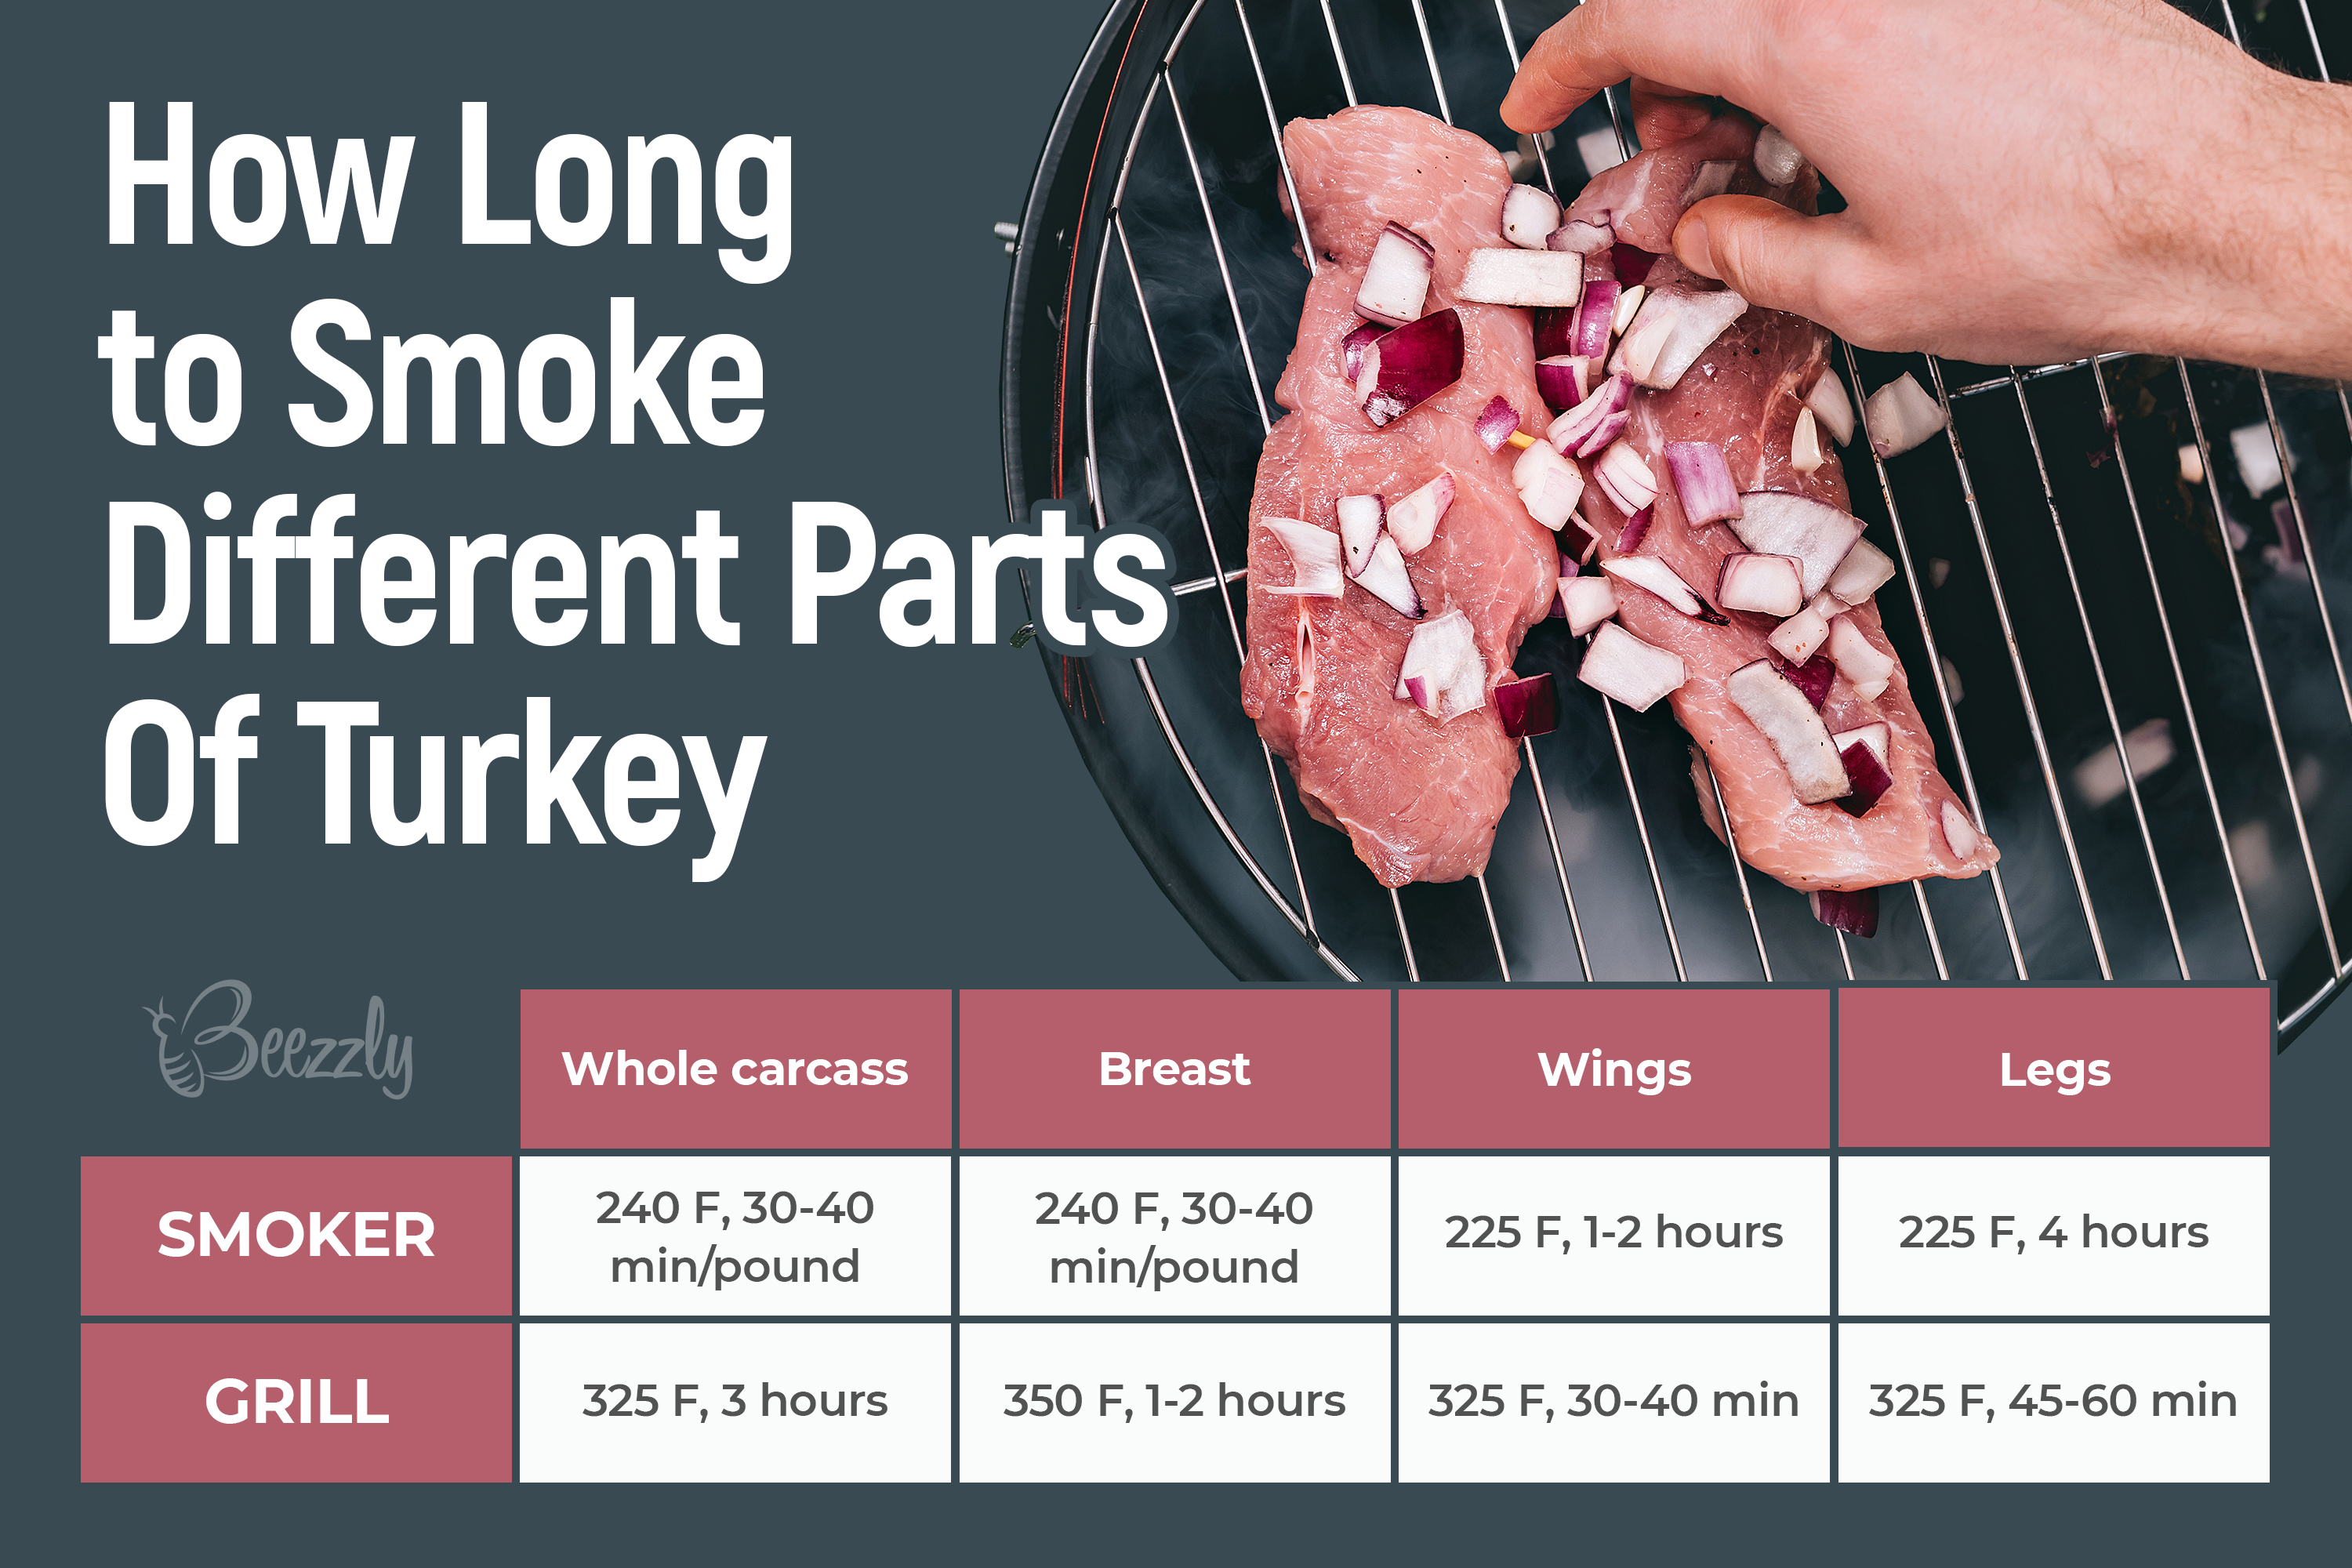 How Long to Smoke Different Parts Of Turkey